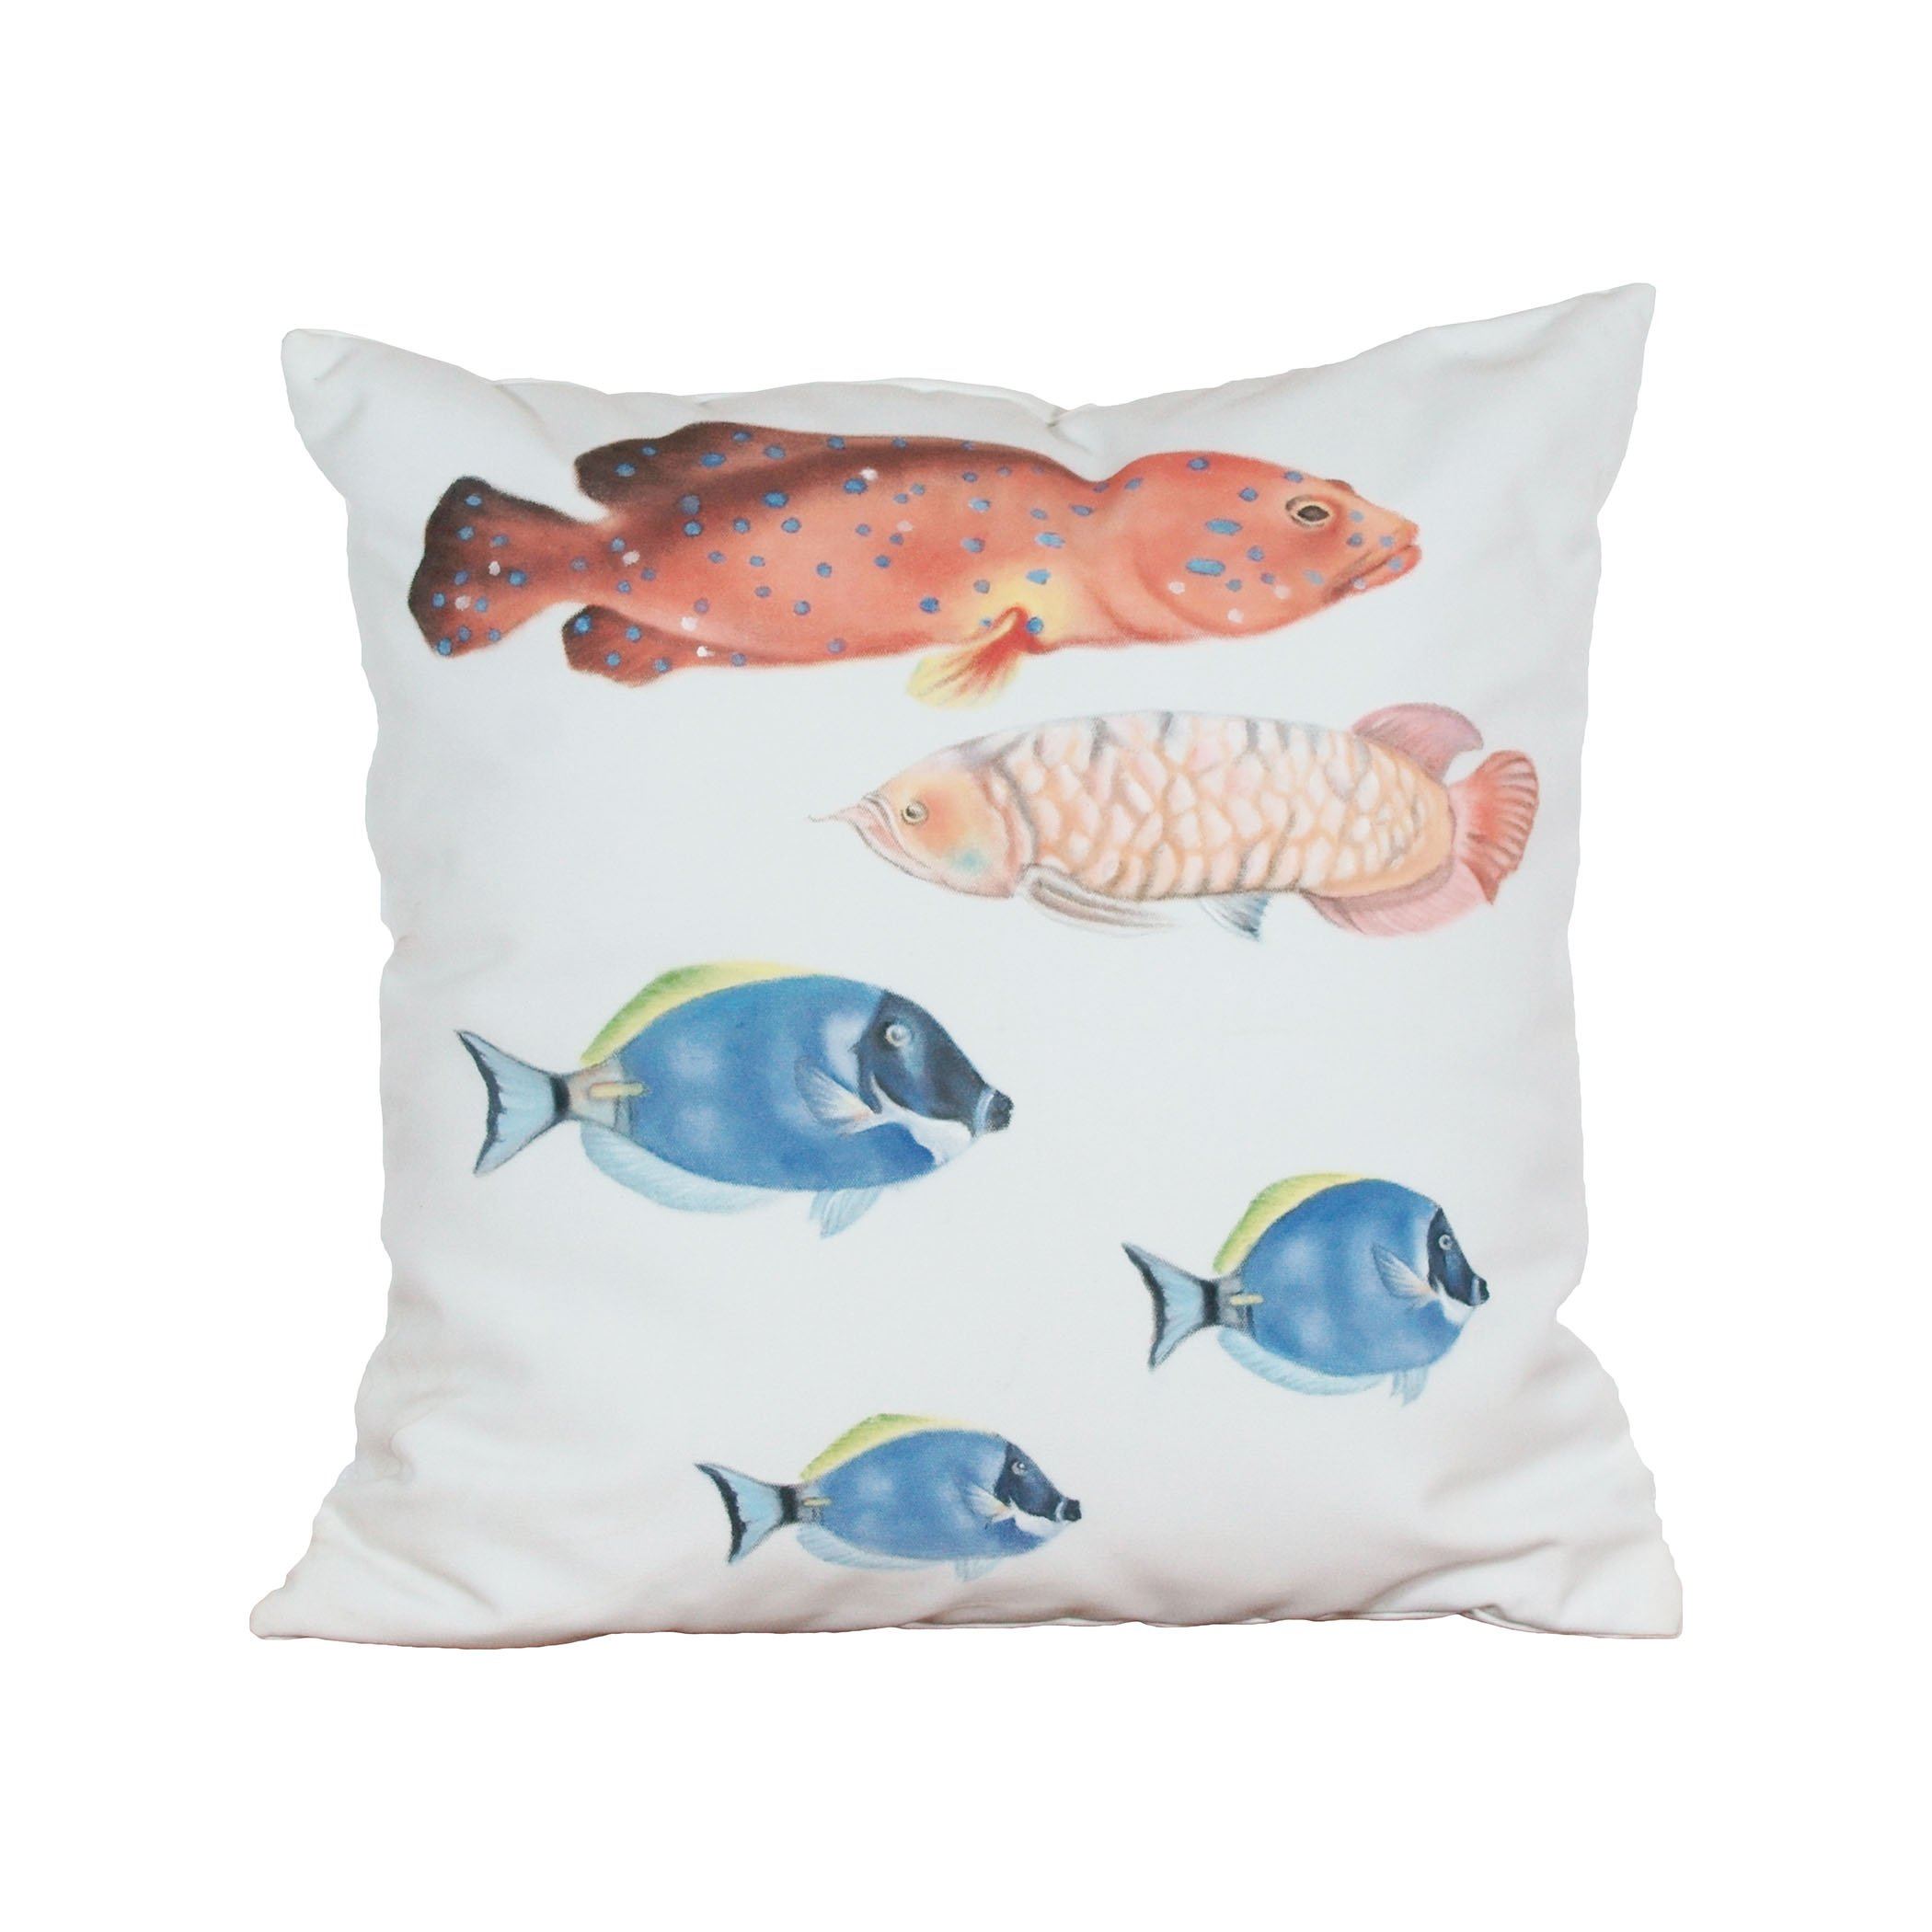 Fish 2 Hand-painted 20x20 Outdoor Pillow Accessories GuildMaster 